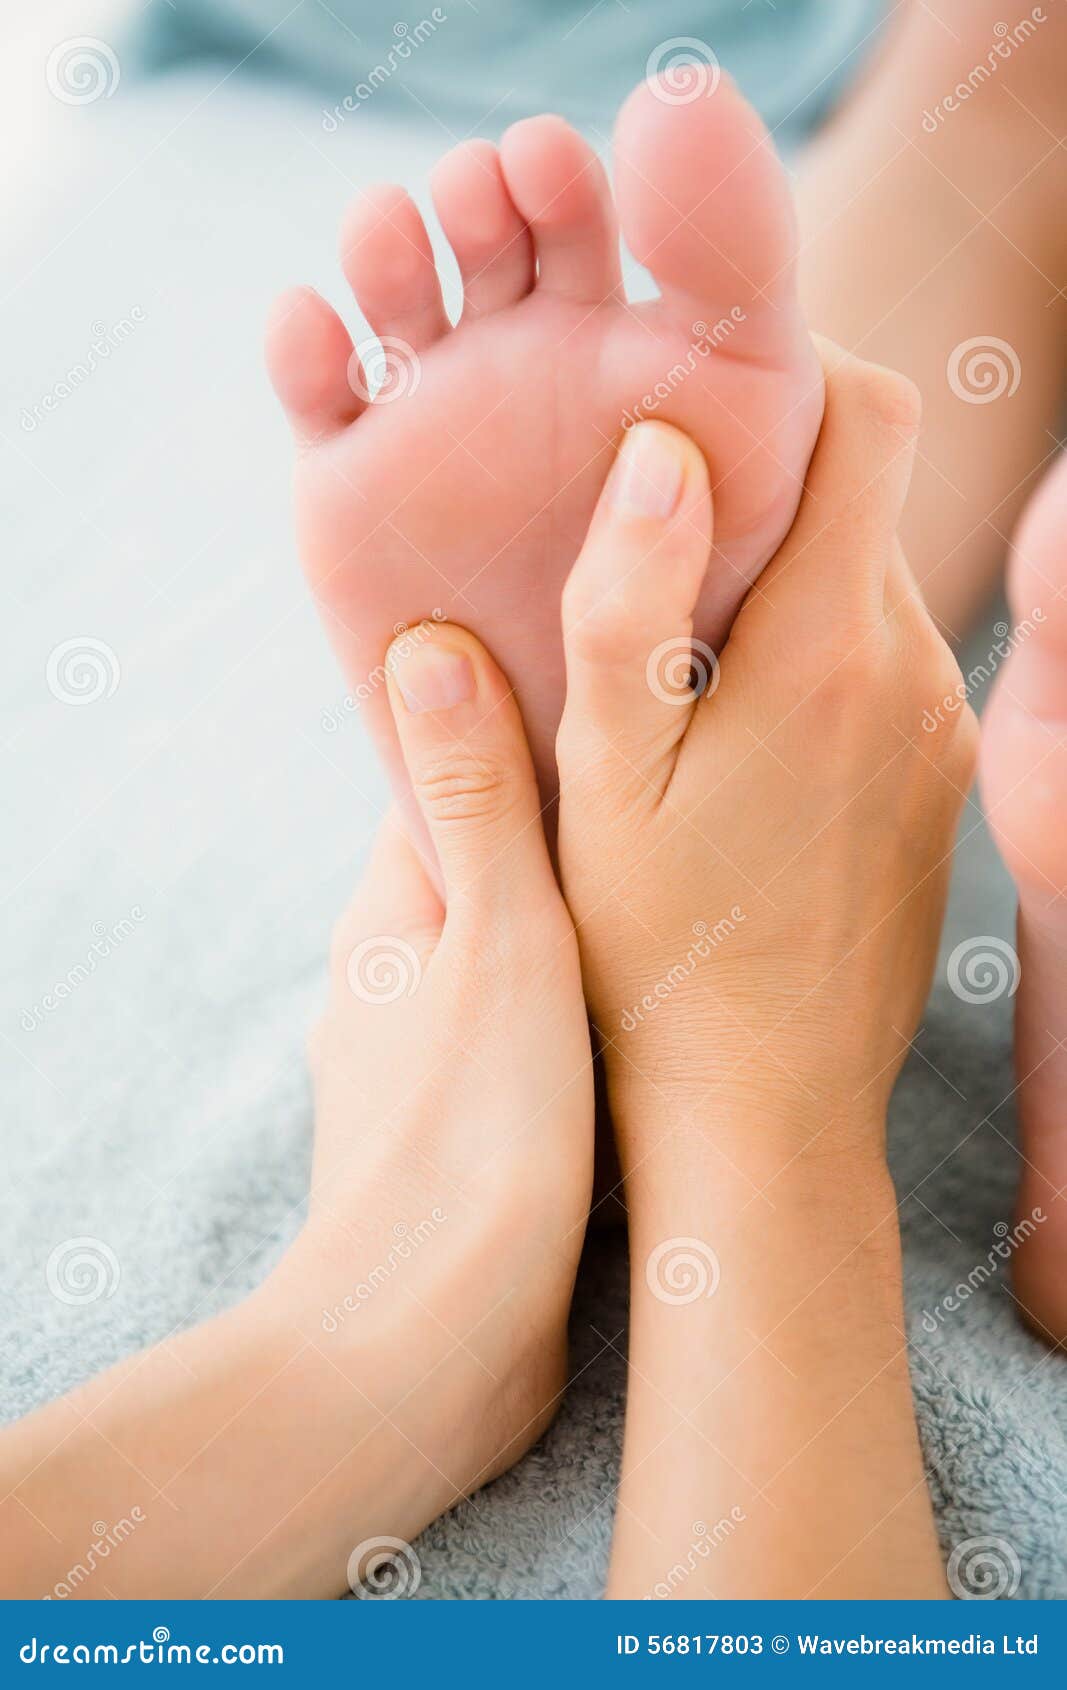 Close Up Of A Woman Receiving Foot Massage Stock Image Image Of Heel